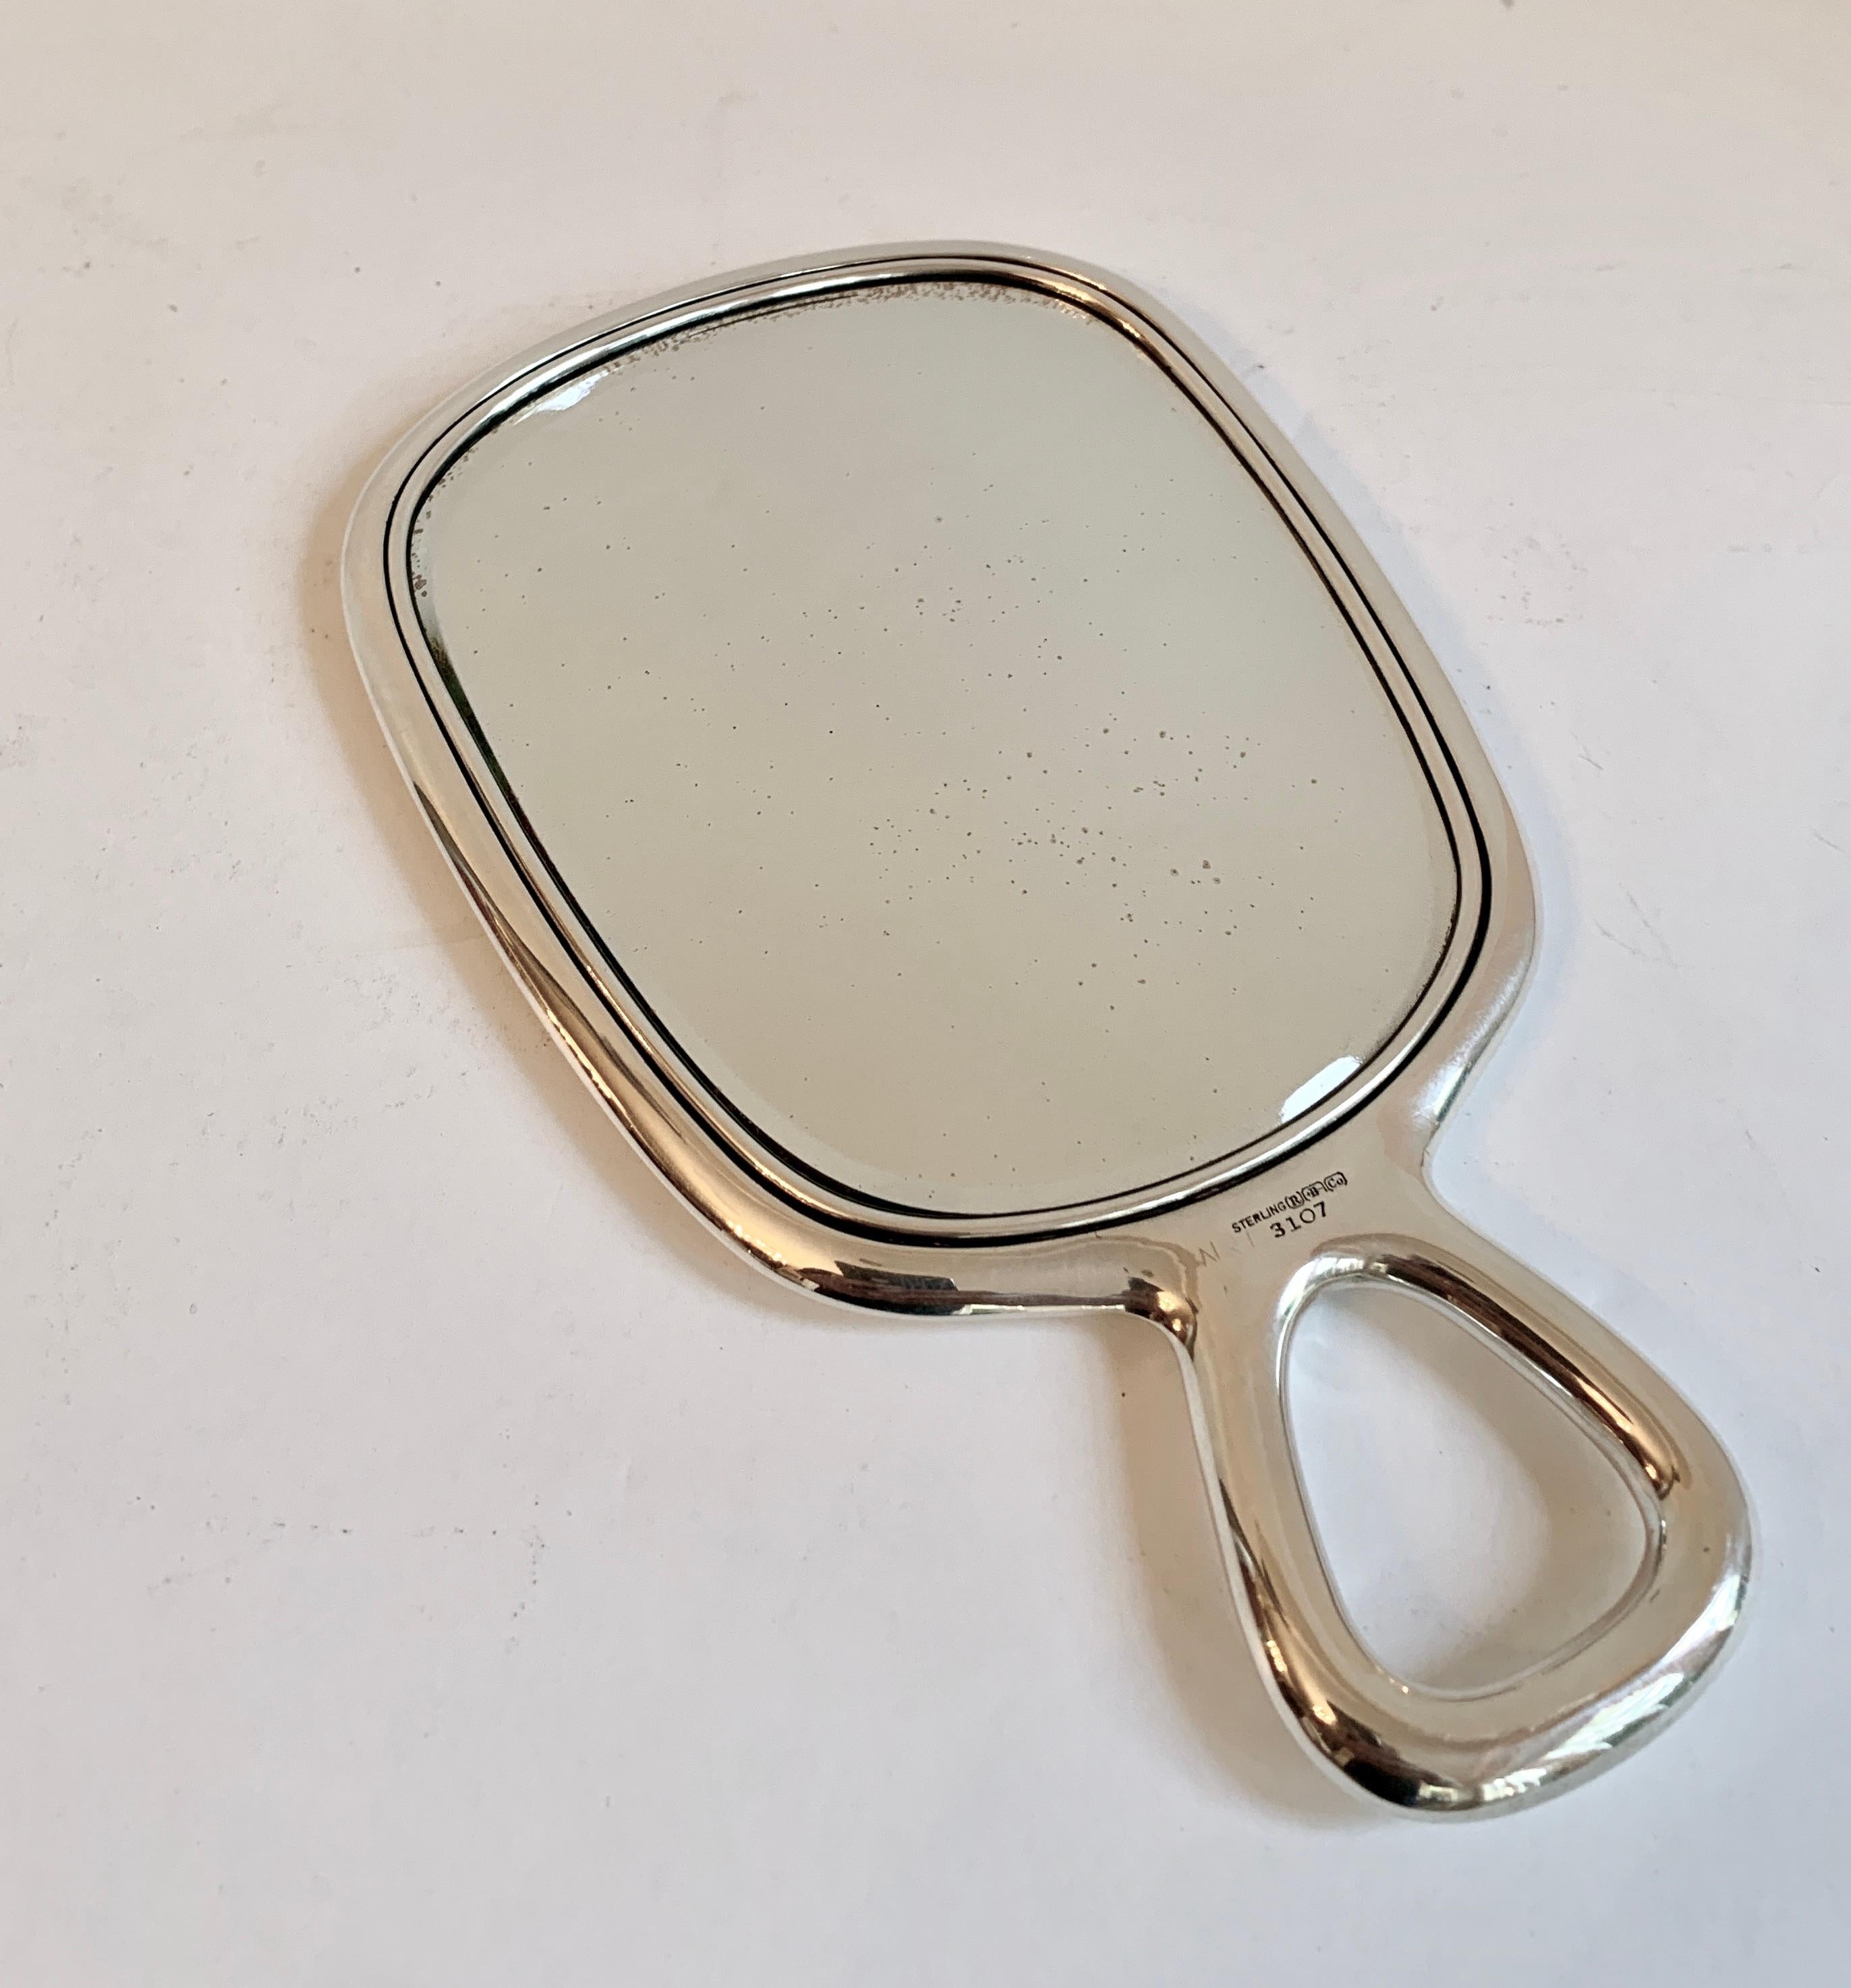 A lovely sterling silver hand mirror. The handle is a compliment to most styles as it is clean, simple and architectural.

We found this to be just the right size for the vanity or dressing table or the guest room. While the mirror and glass do